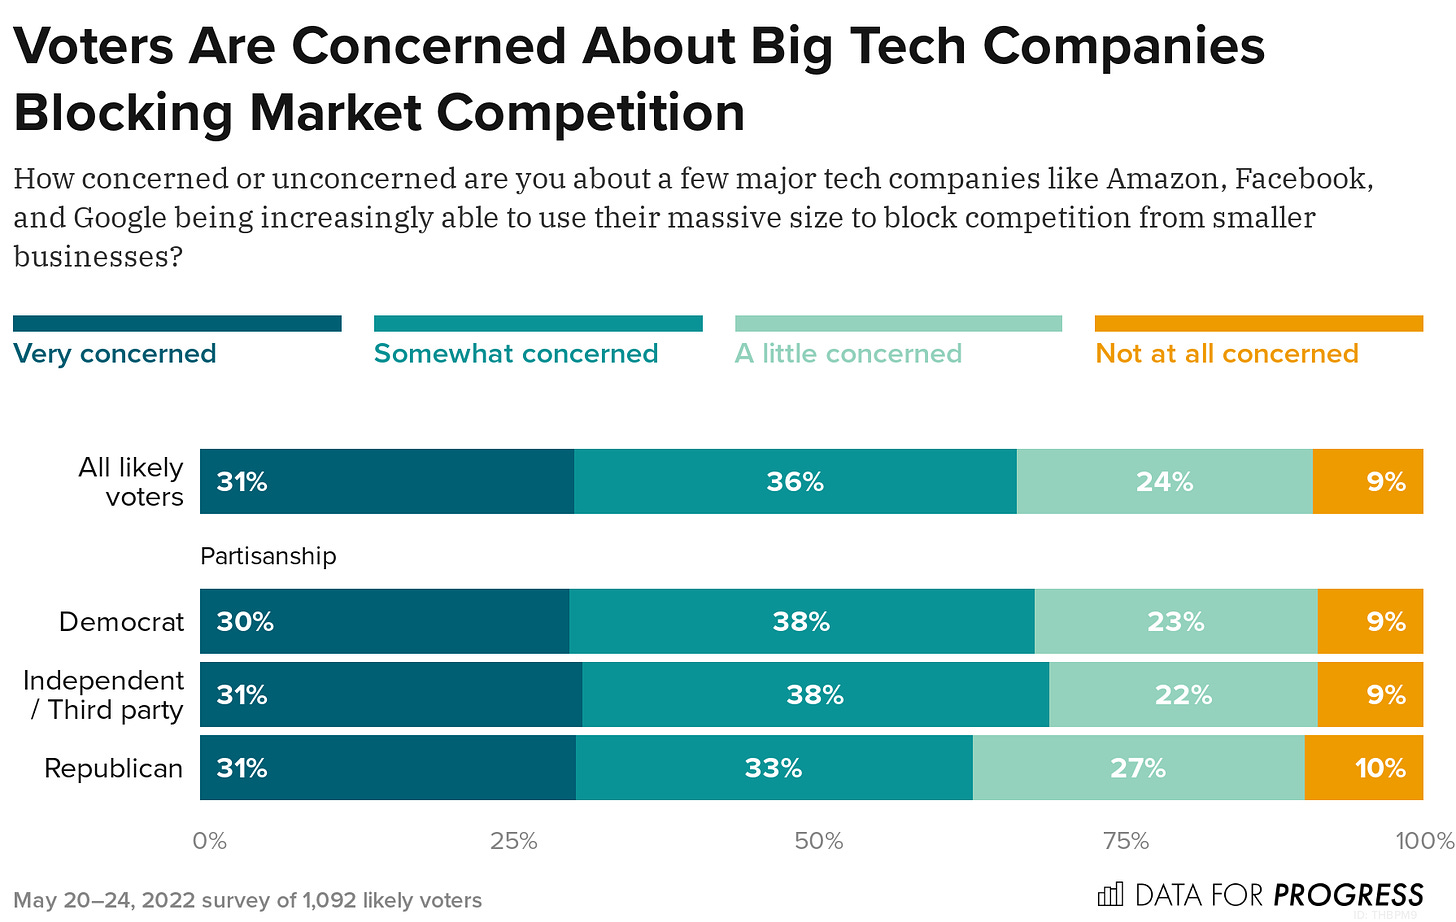 A Bipartisan Majority of Voters Are Concerned About the Impact Big Tech  Companies Have on the U.S. Economy and on Economic Competition